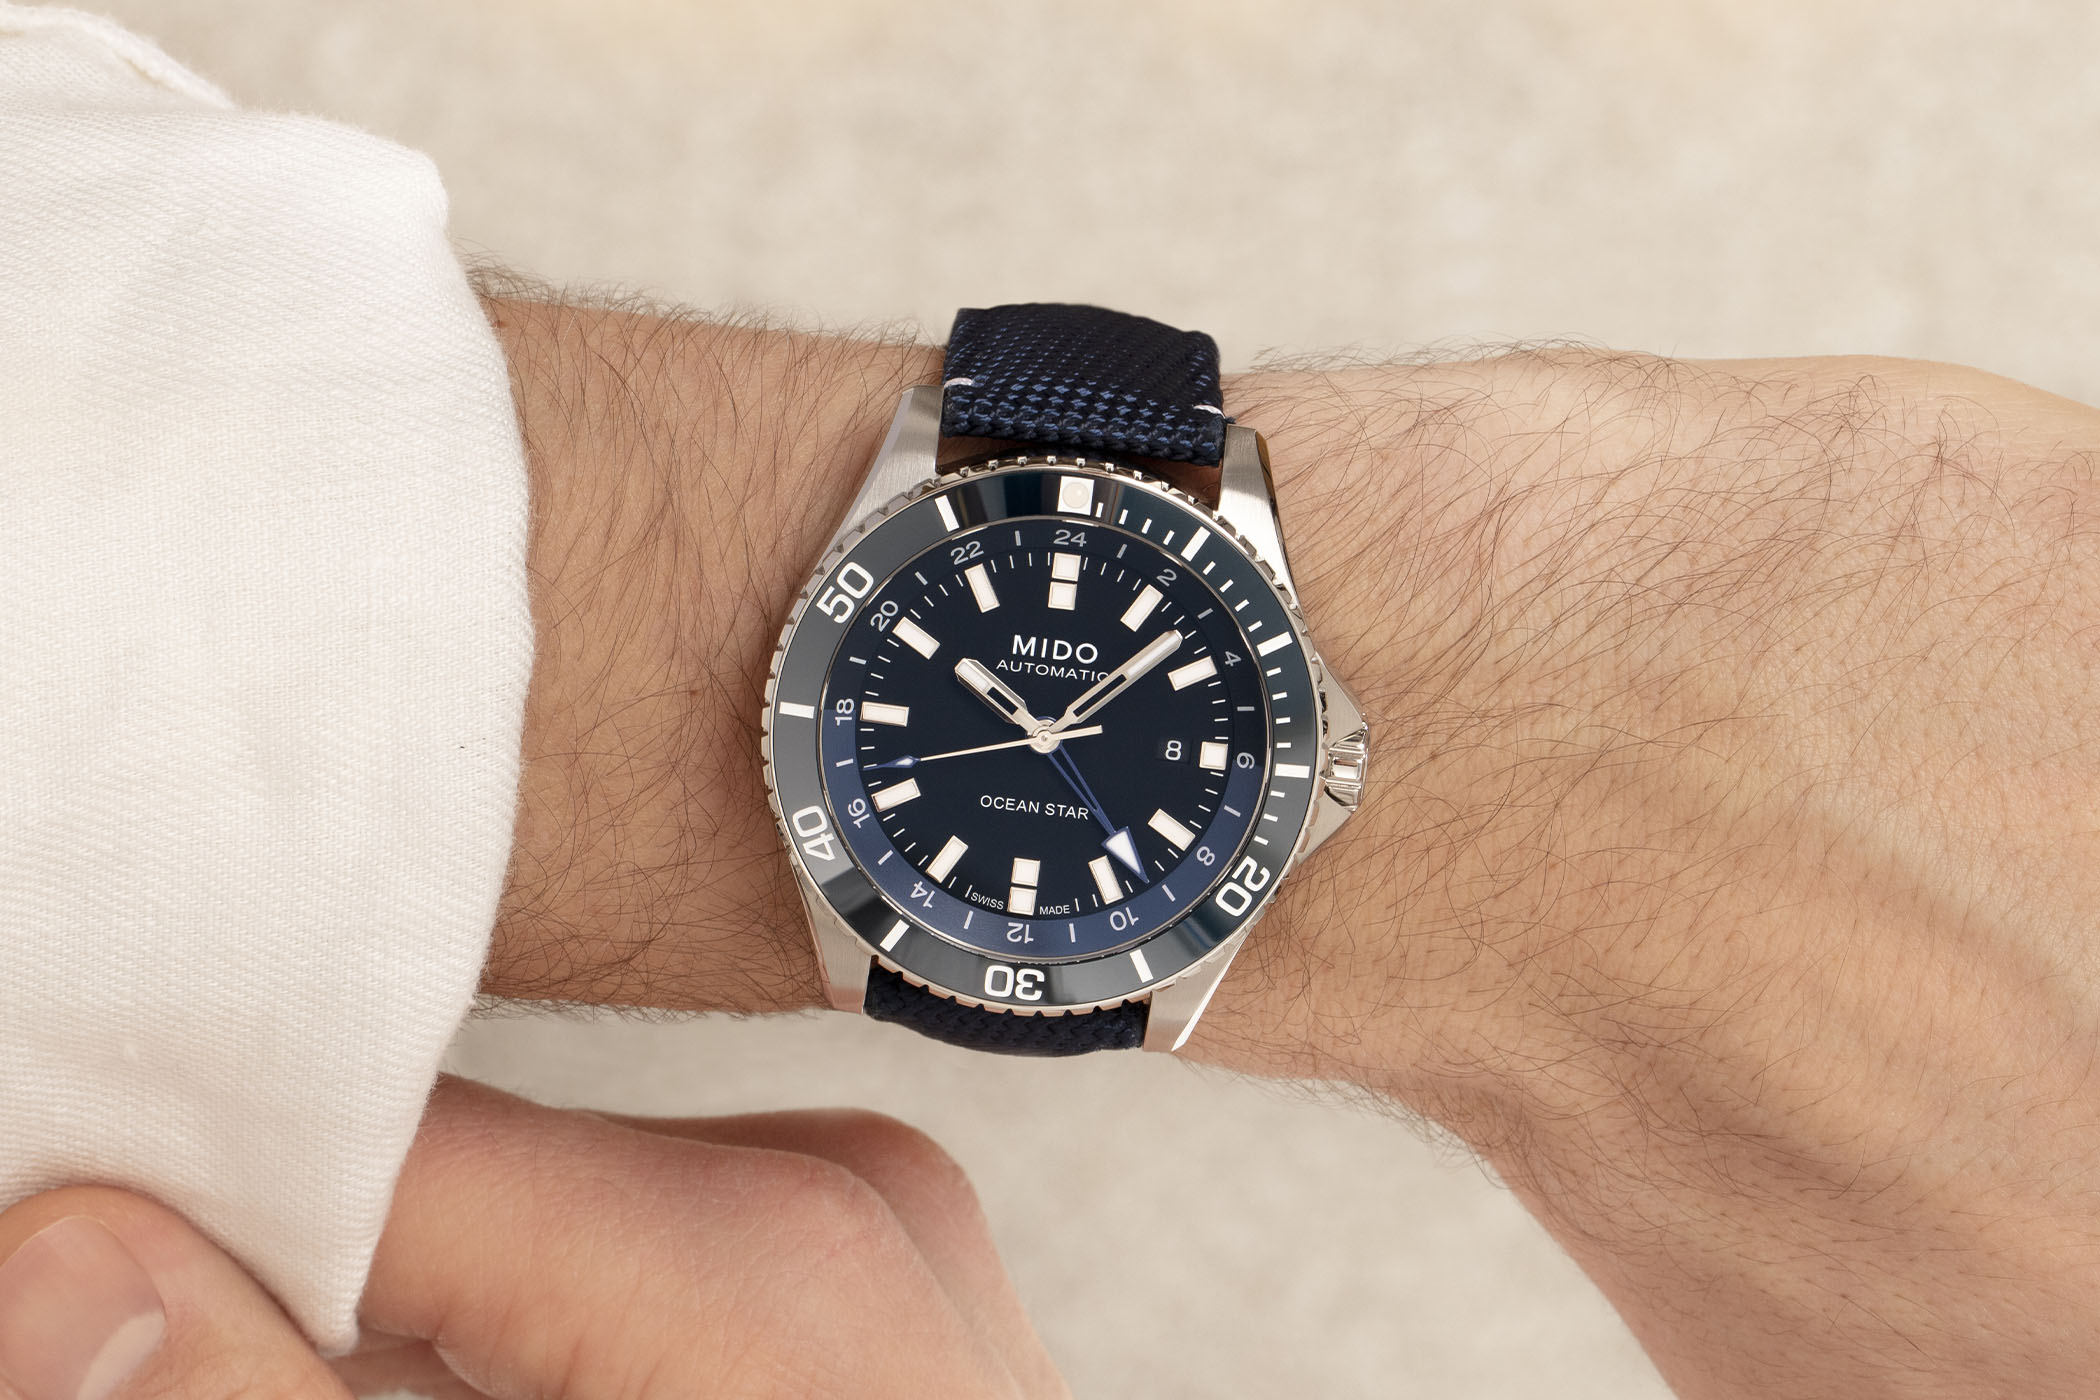 Introducing Mido Ocean Star GMT WATCHLOUNGE